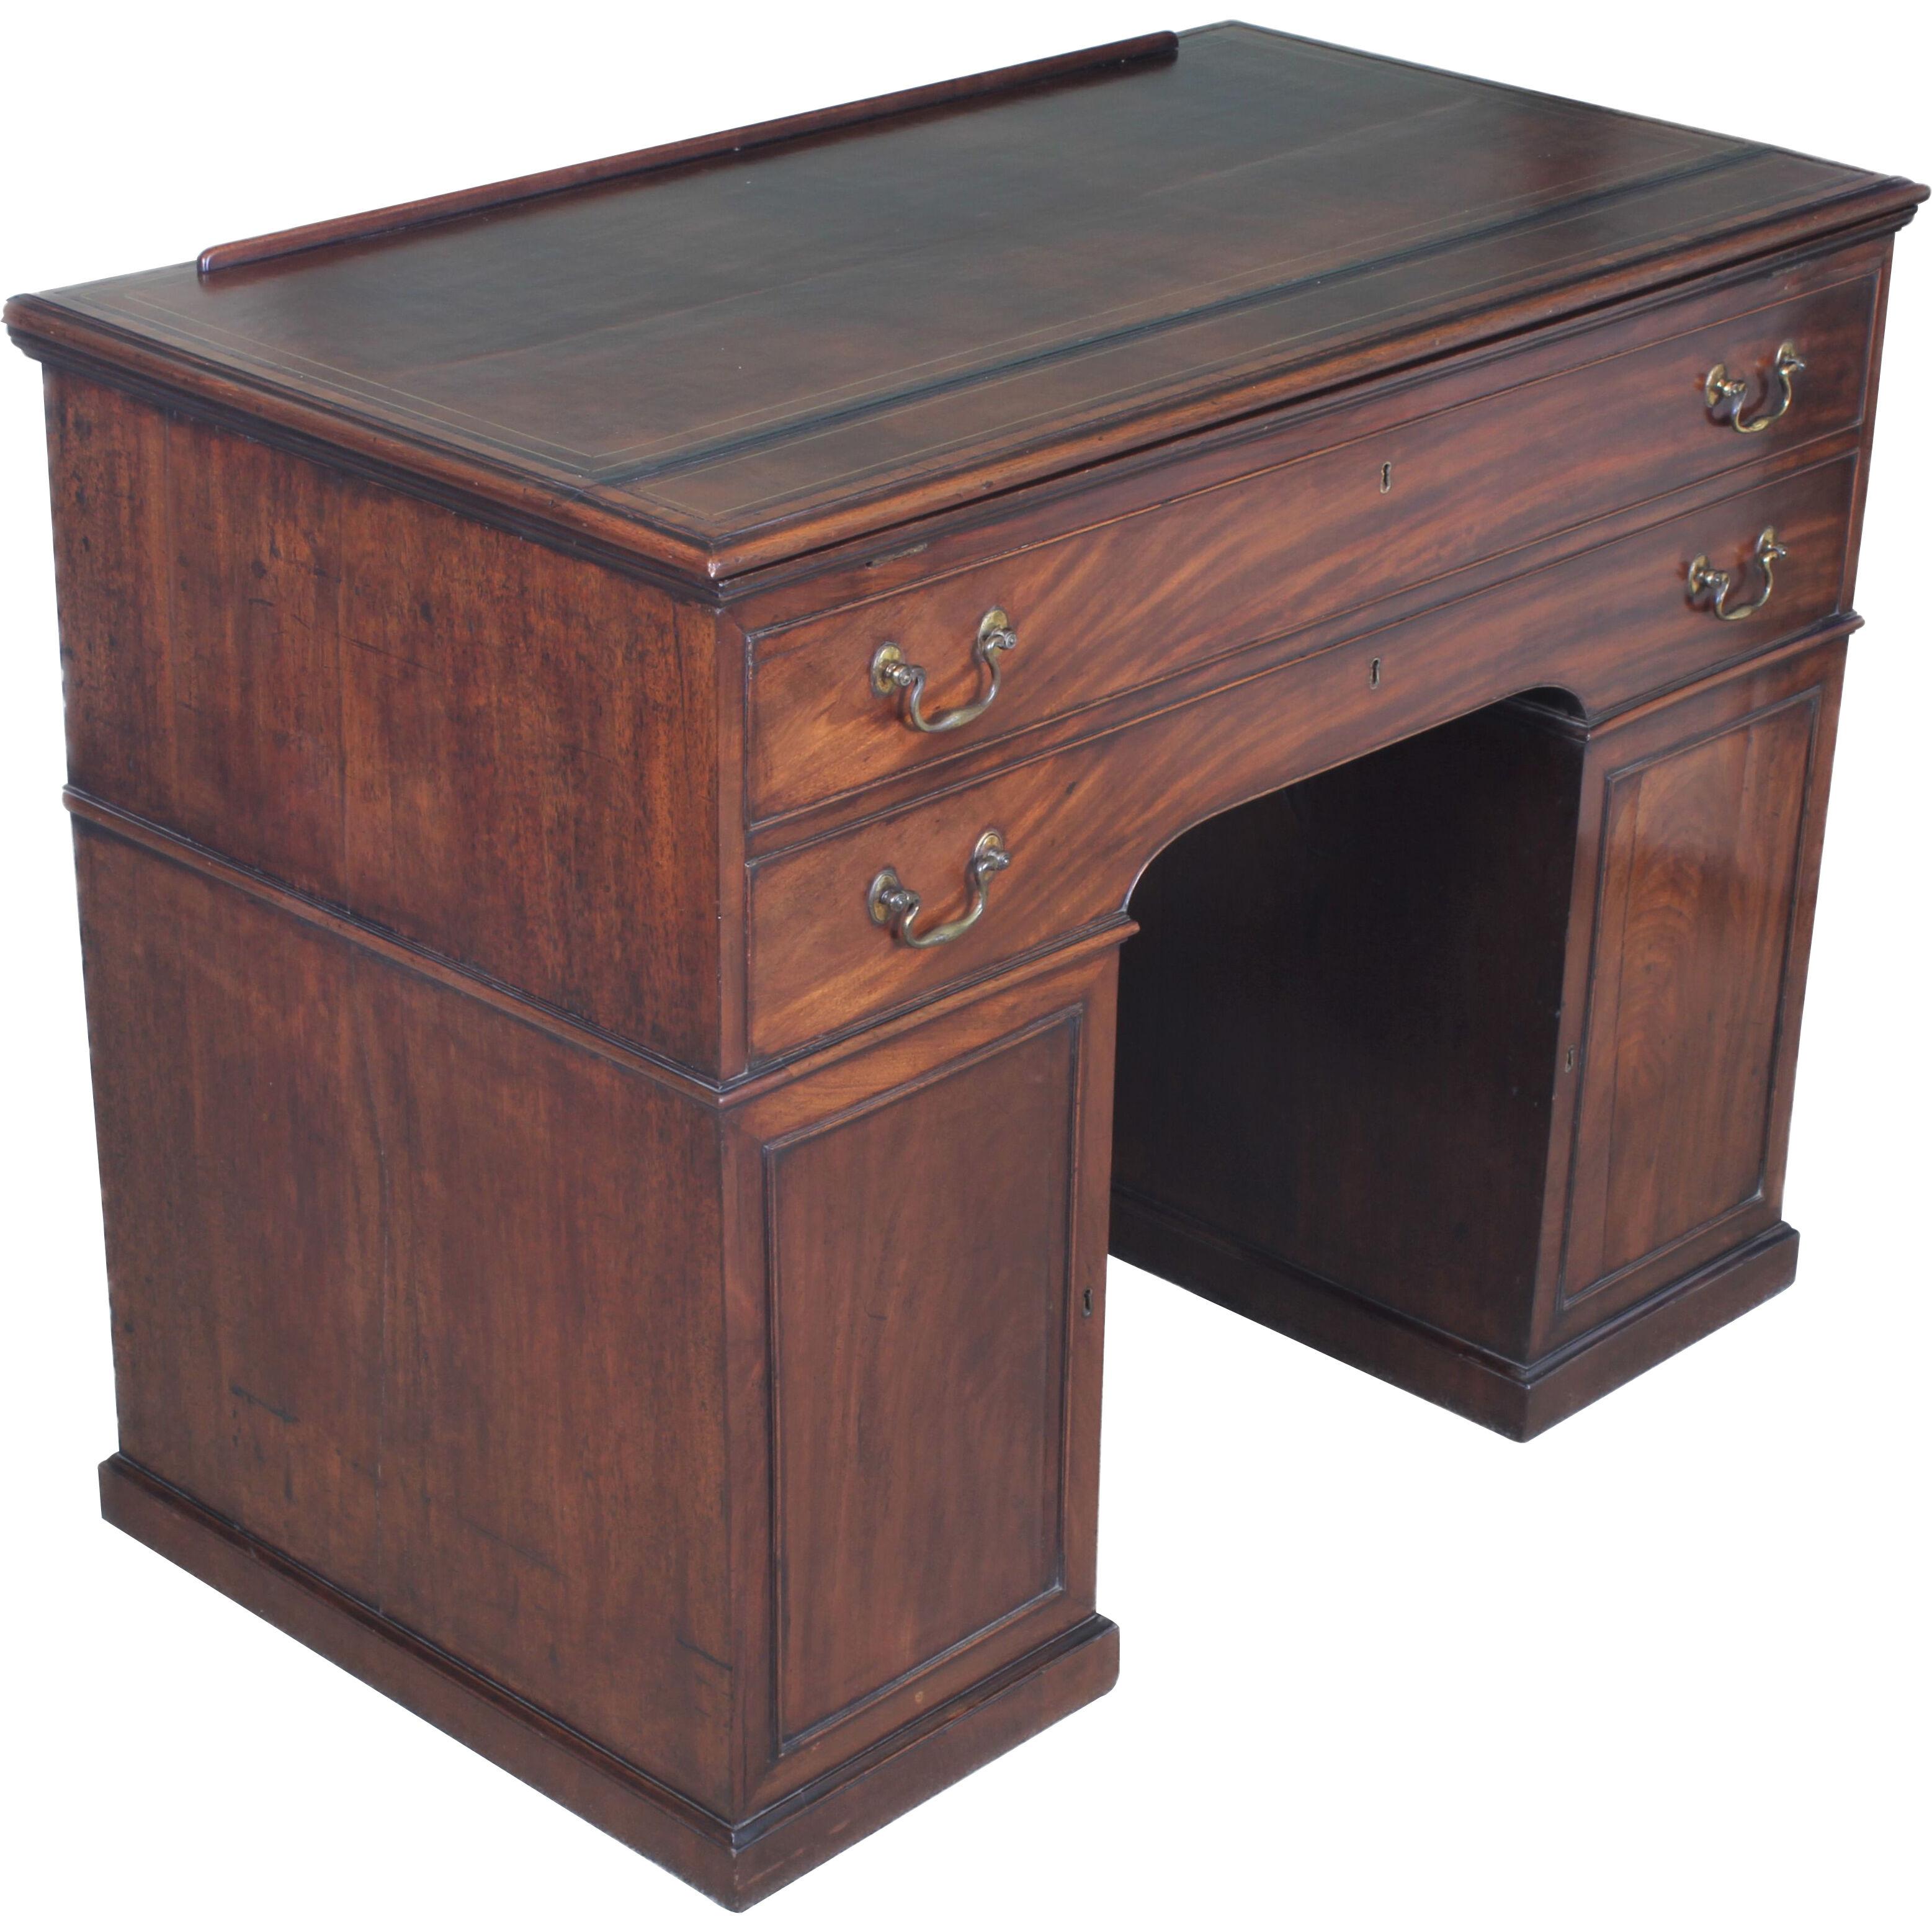 Very fine George III period mahogany Library or Architect's desk